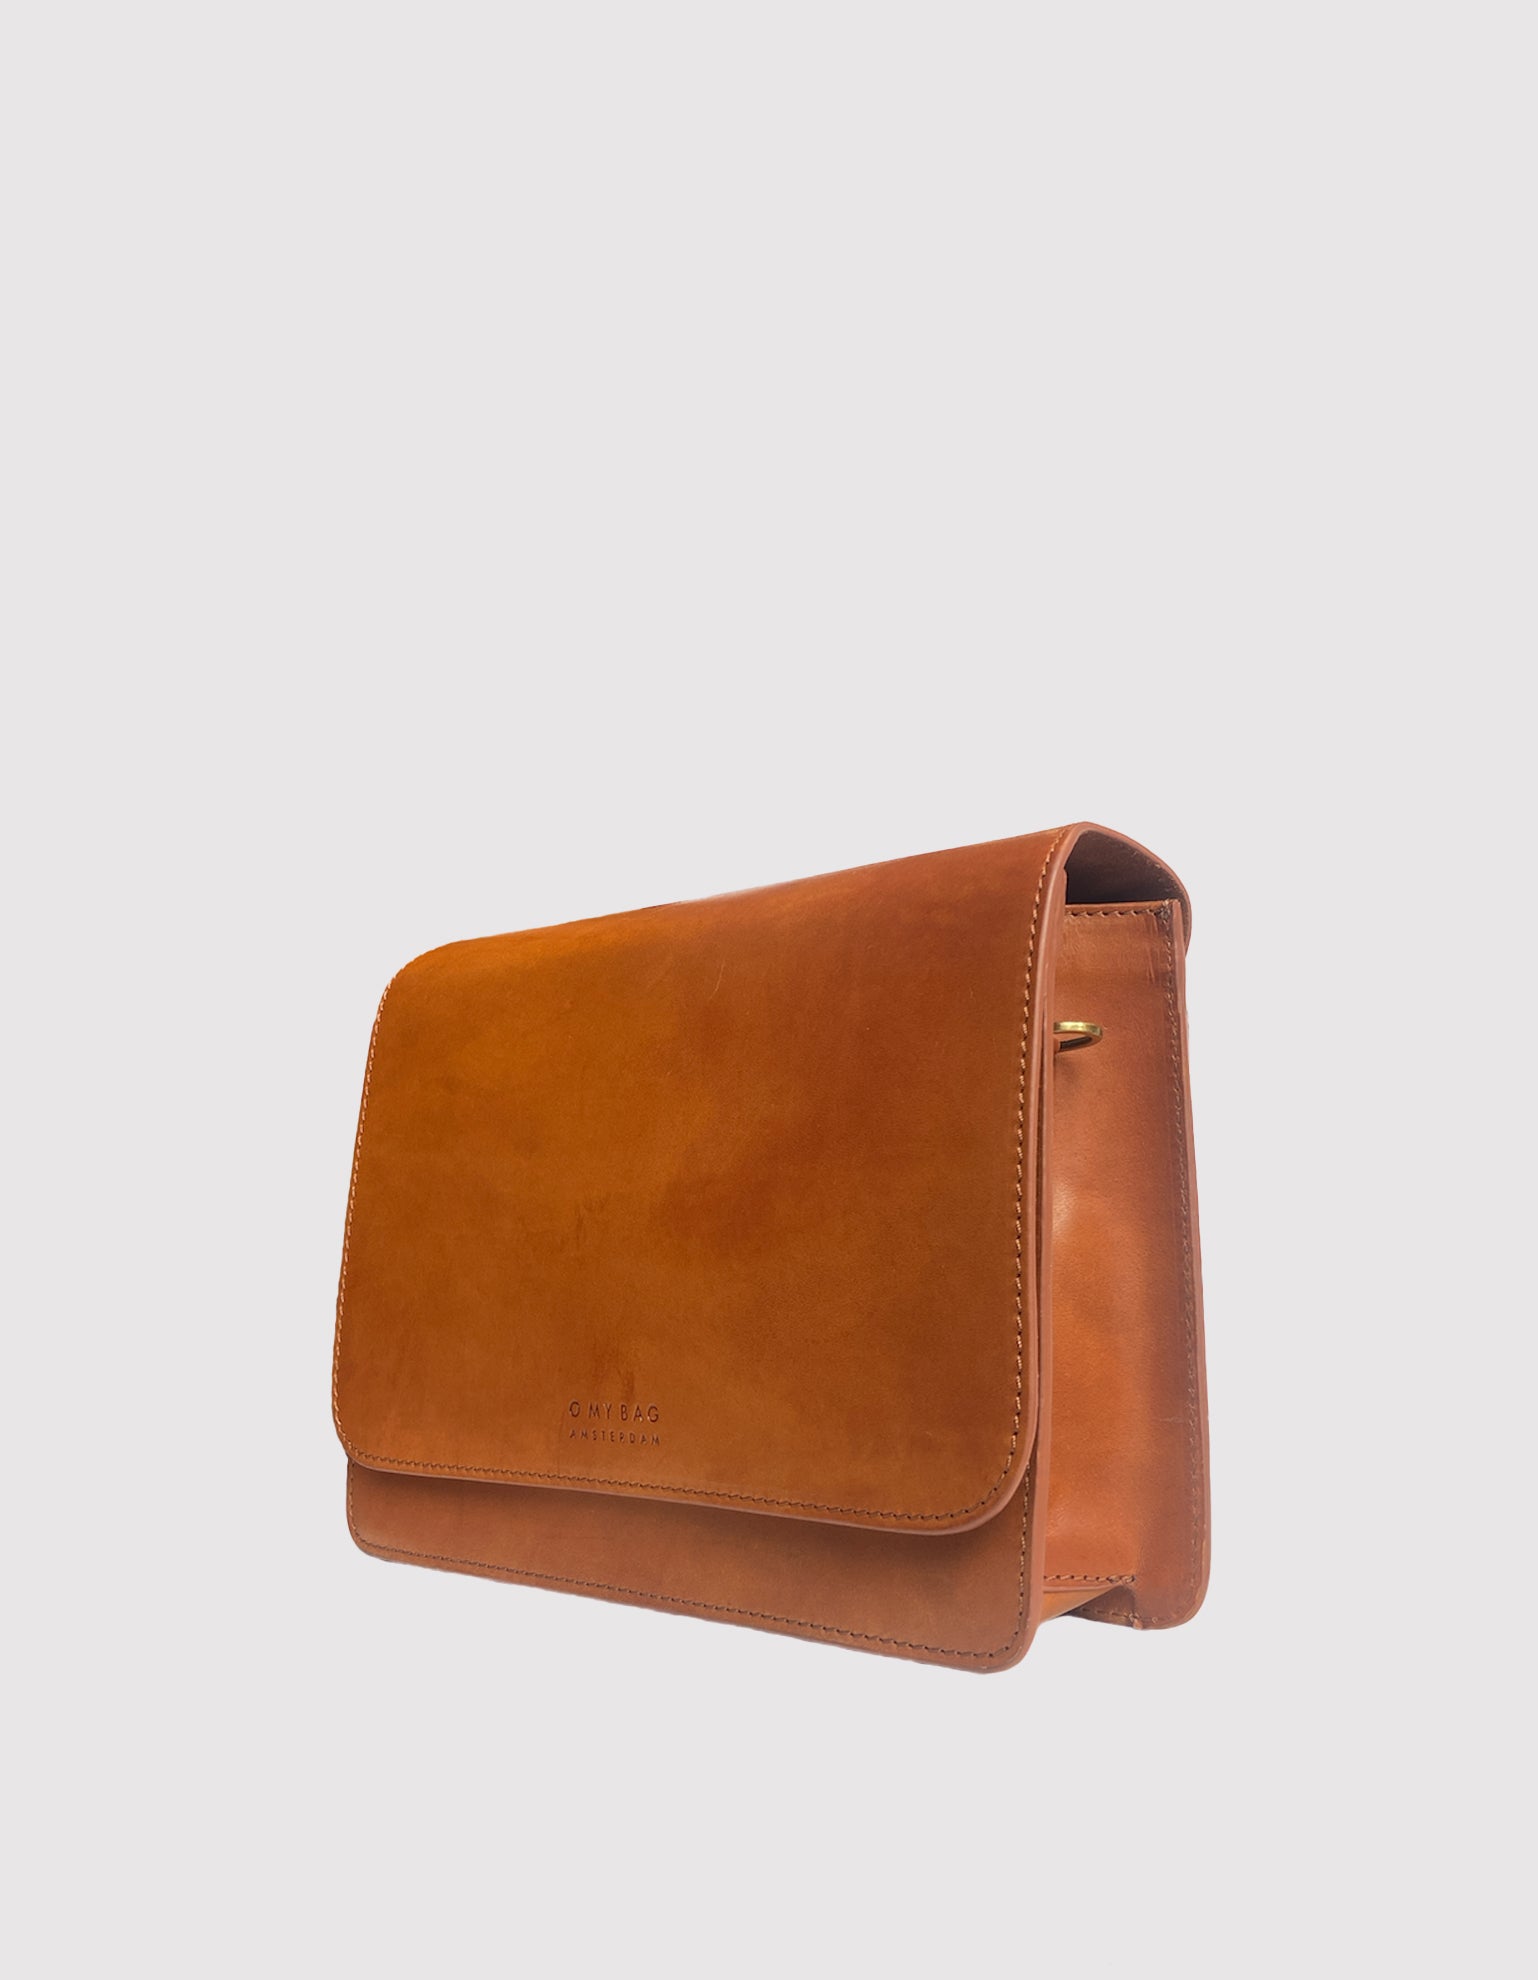 Perfectly Imperfect Audrey - Cognac Classic Leather